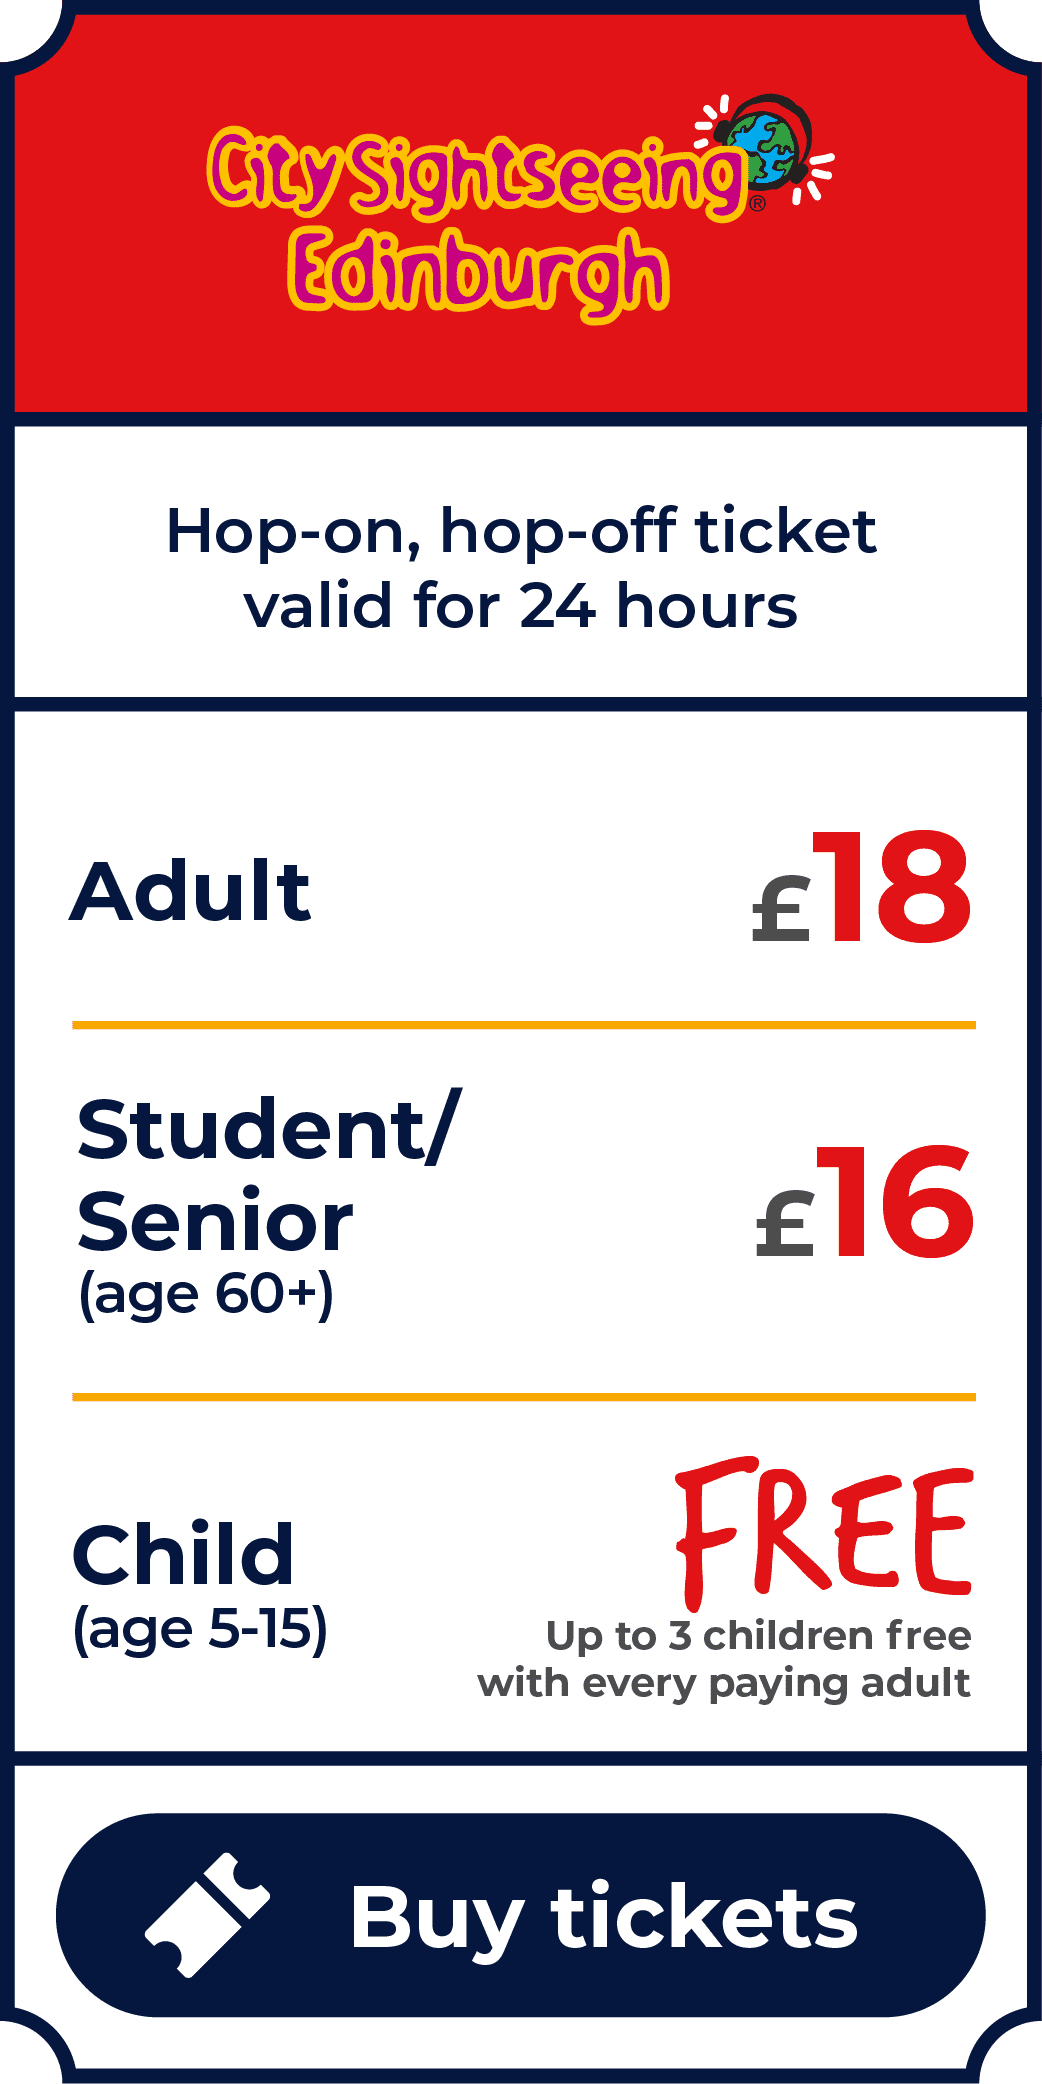 CitySightseeing Edinburgh Tour. Hop on, hop off ticket valid for 24 hours. Prices: Adult (age 16+) is £18. Student (with valid student ID) is £16. Senior (age 60+) is £16. Child (age 5-15) is free. Up to 3 children go free with every paying adult. Click to buy tickets.